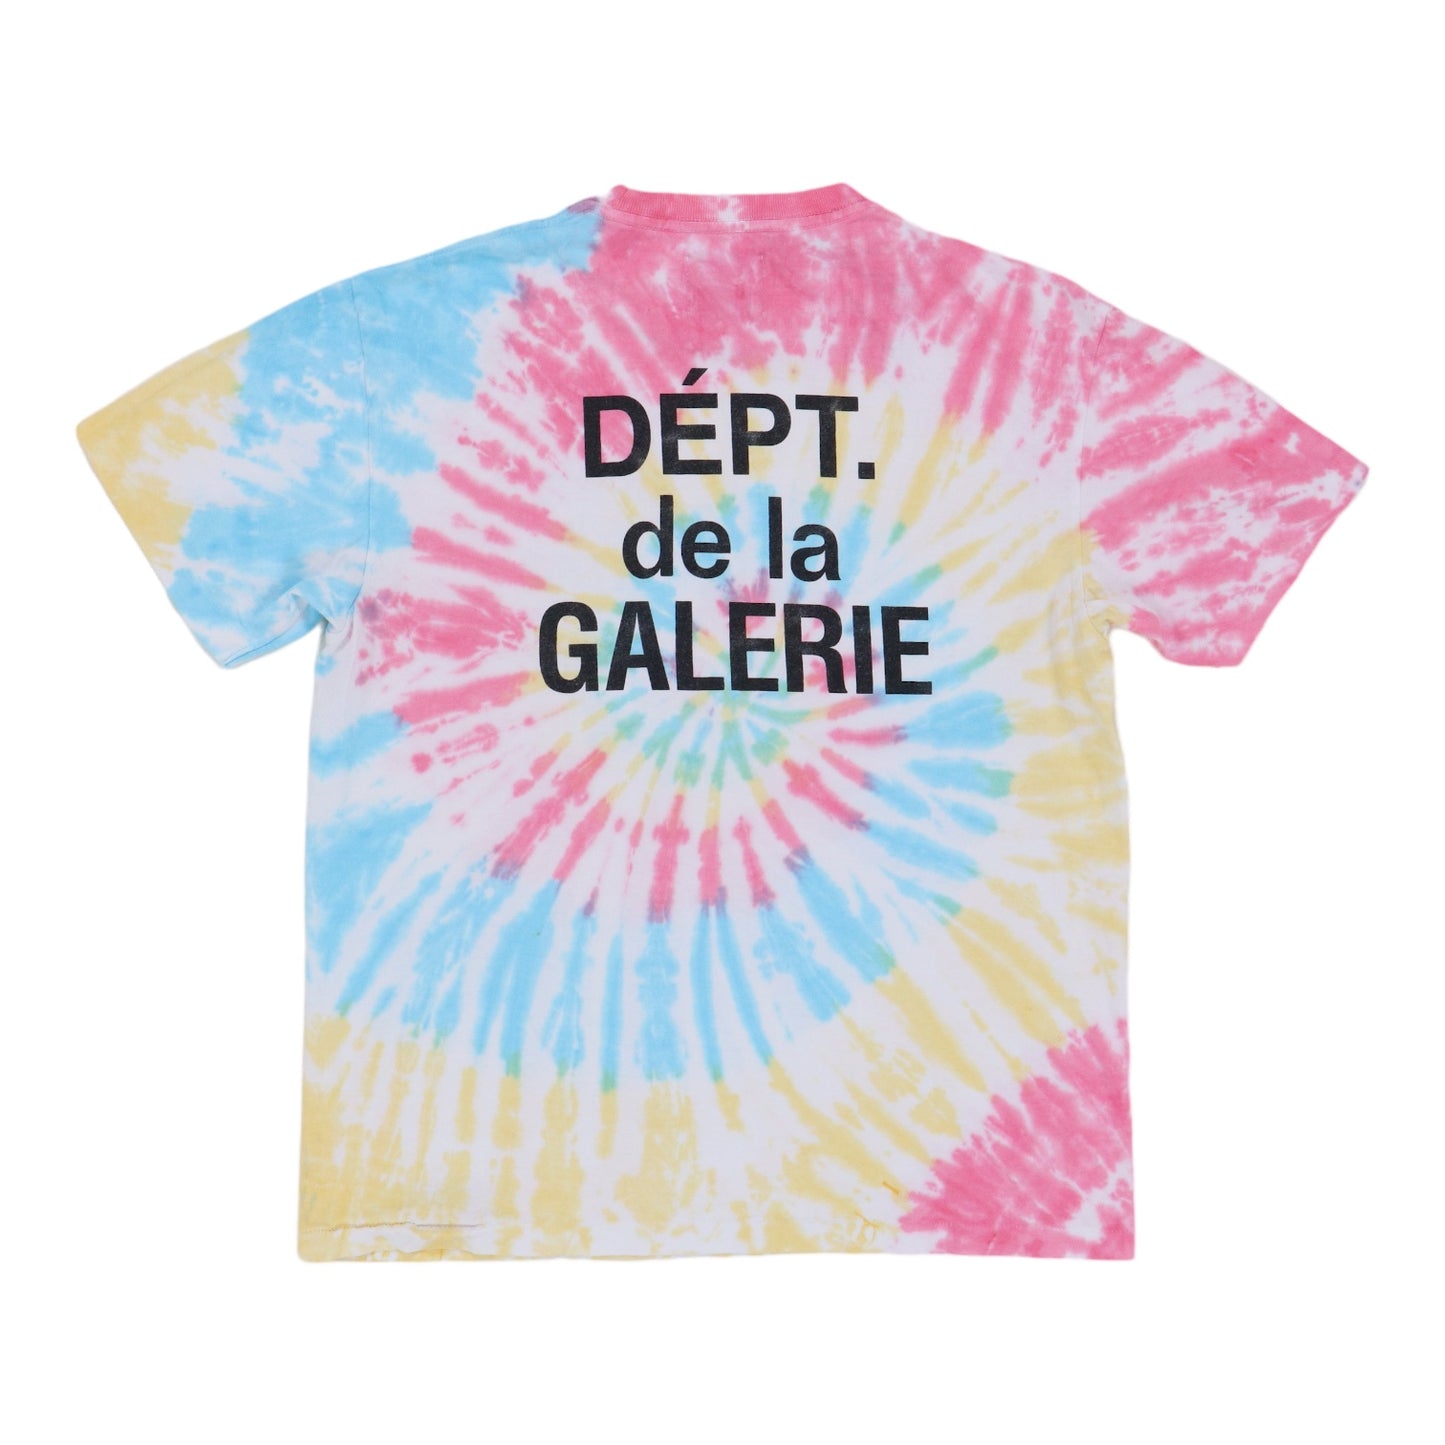 Gallery Dept. French Tie Dye Tee